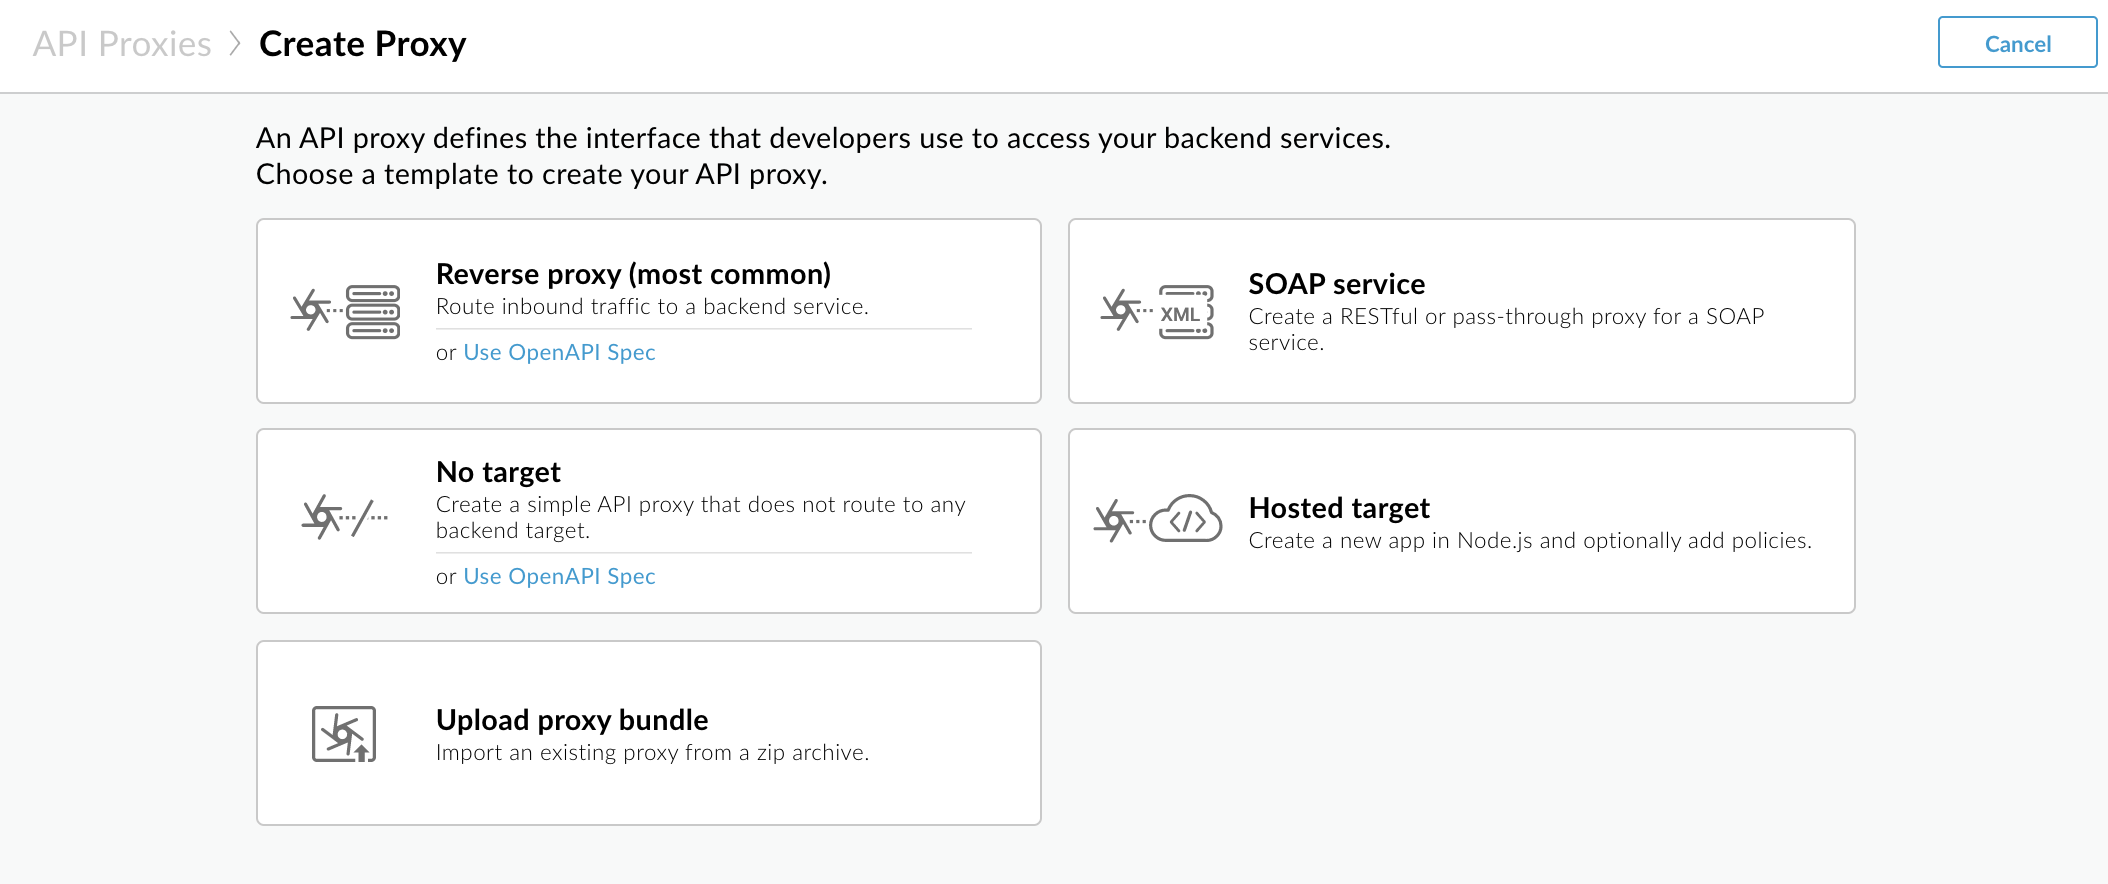 First page of the Create Proxy wizard prompting you to select reverse proxy, SOAP service, No Target, or Proxy bundle to customize the wizard flow.